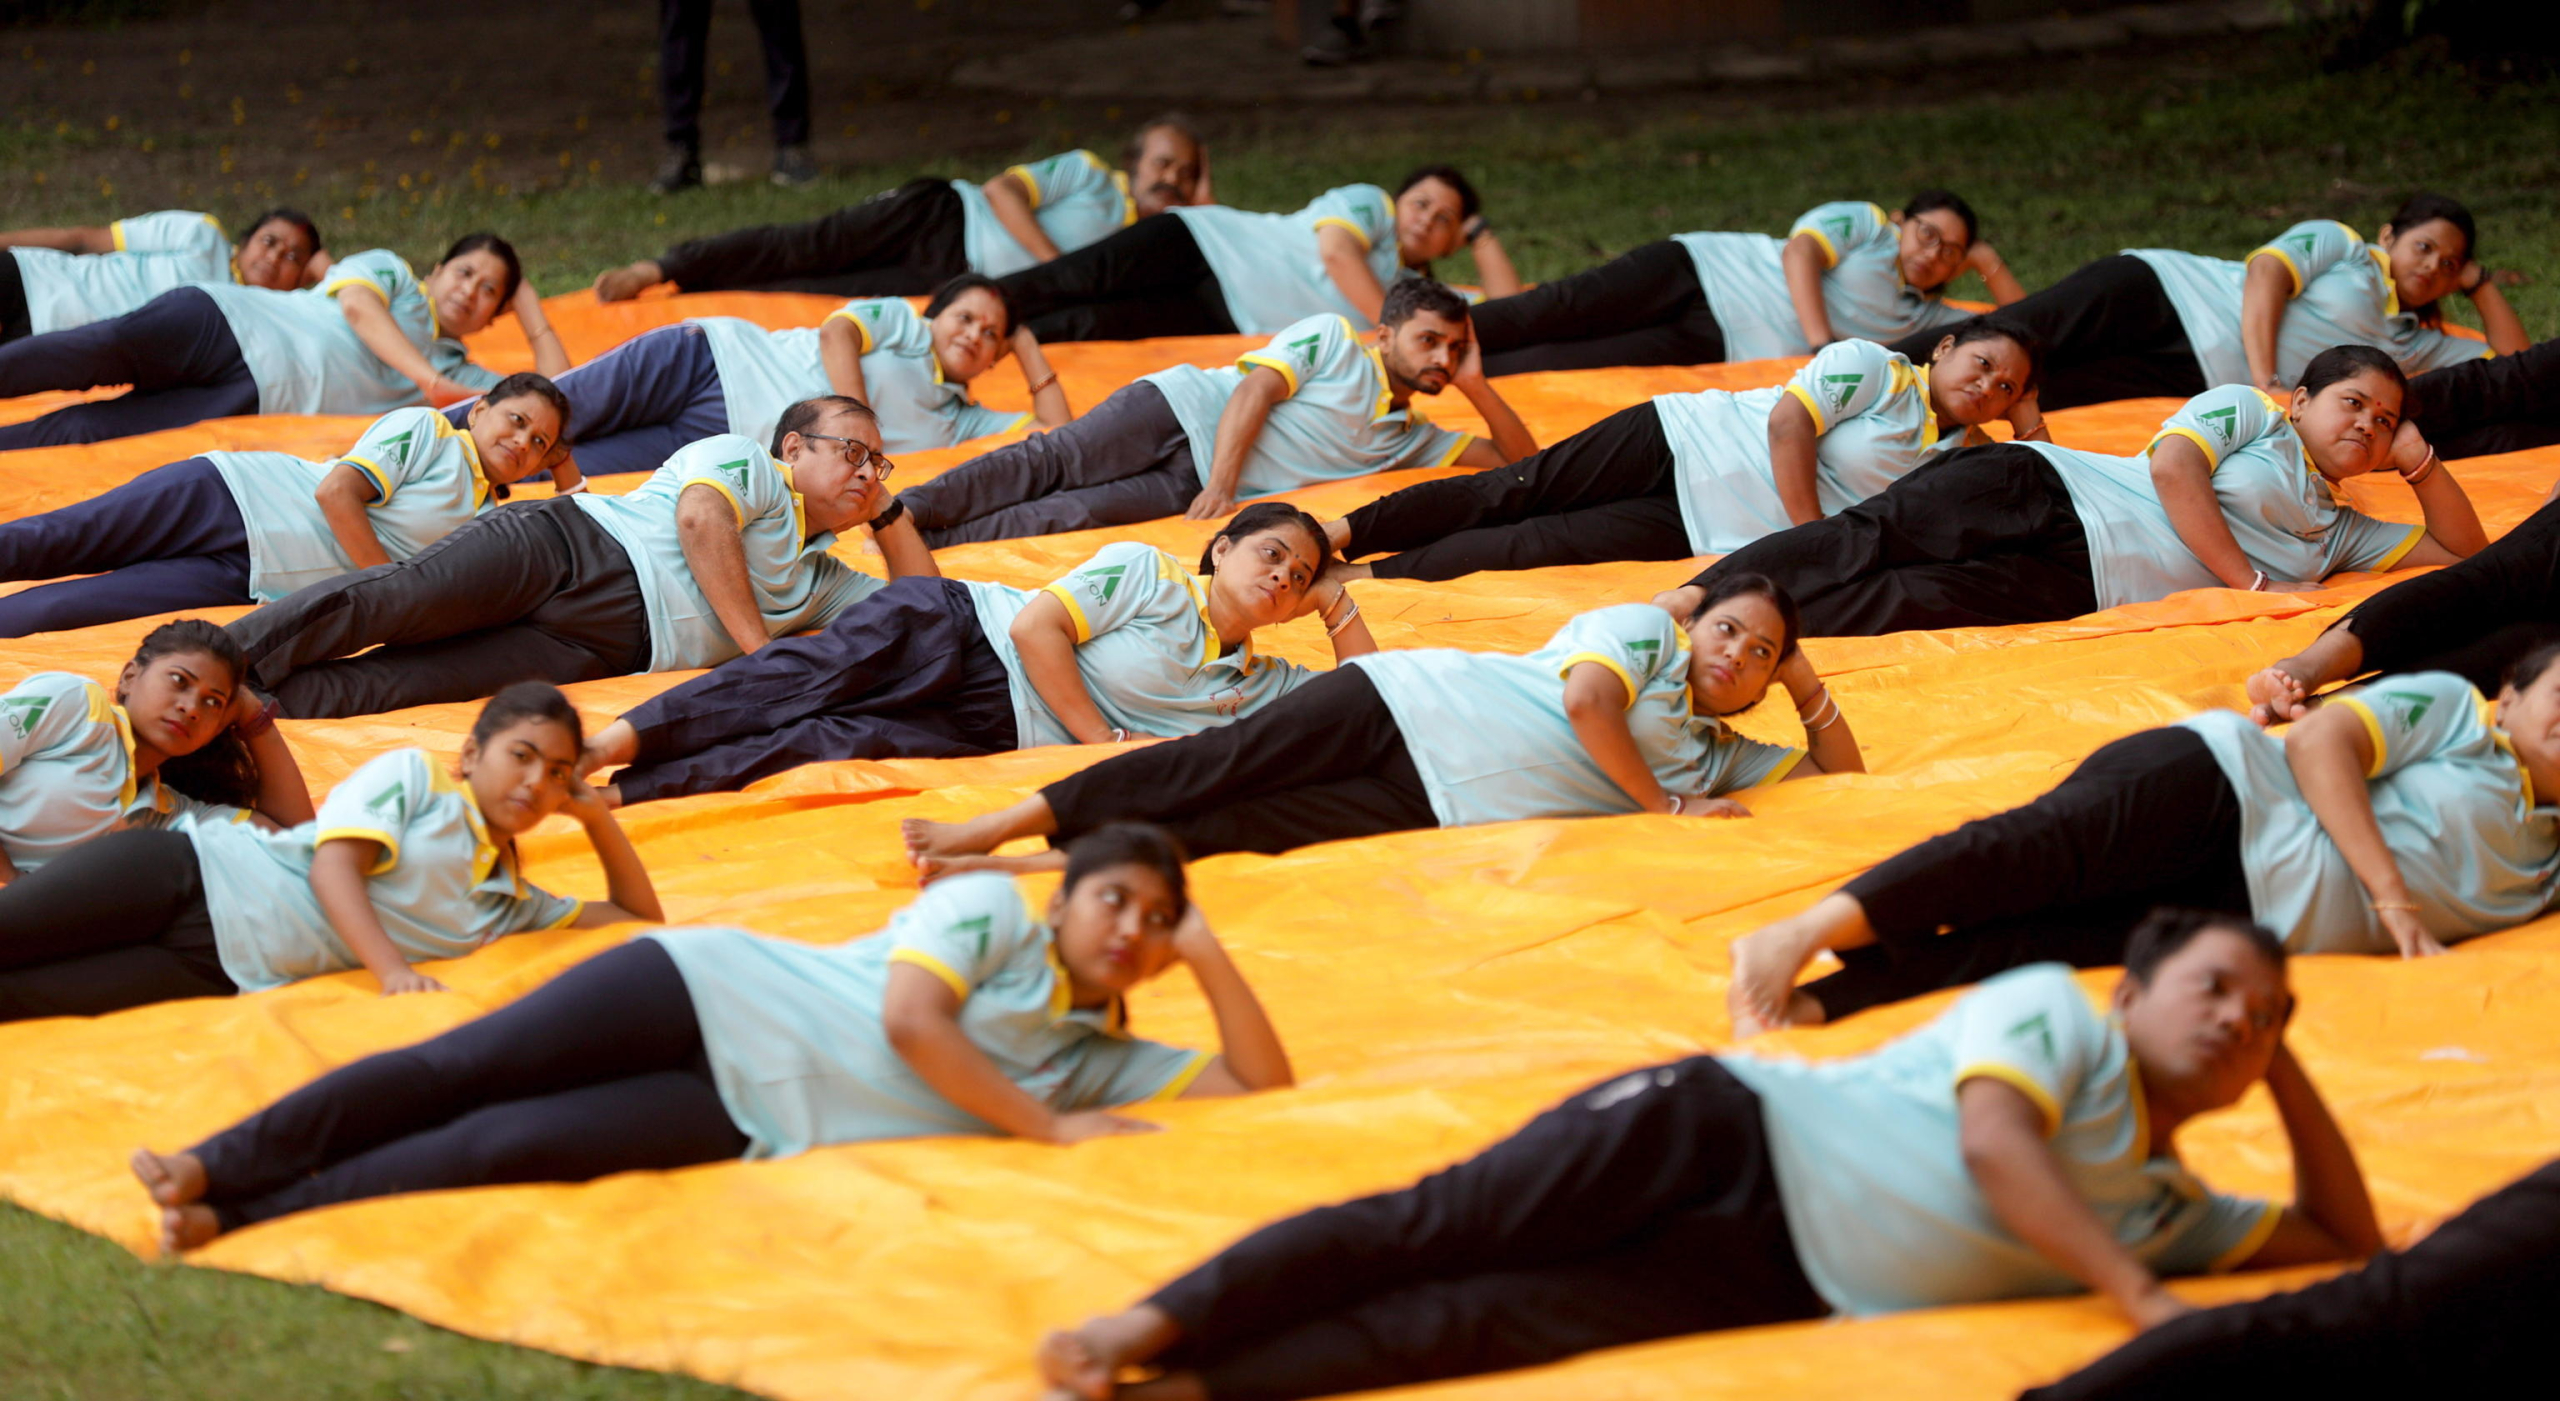 epa11427194 People perform yoga exercises during International Day of Yoga in Kolkata, India 21 June 2024. International Yoga Day is celebrated annually on 21 June and has been recognized worldwide since 2015. The United Nations declared yoga a practice of physical, mental, and spiritual exercise originating in ancient India.  EPA/PIYAL ADHIKARY 55717